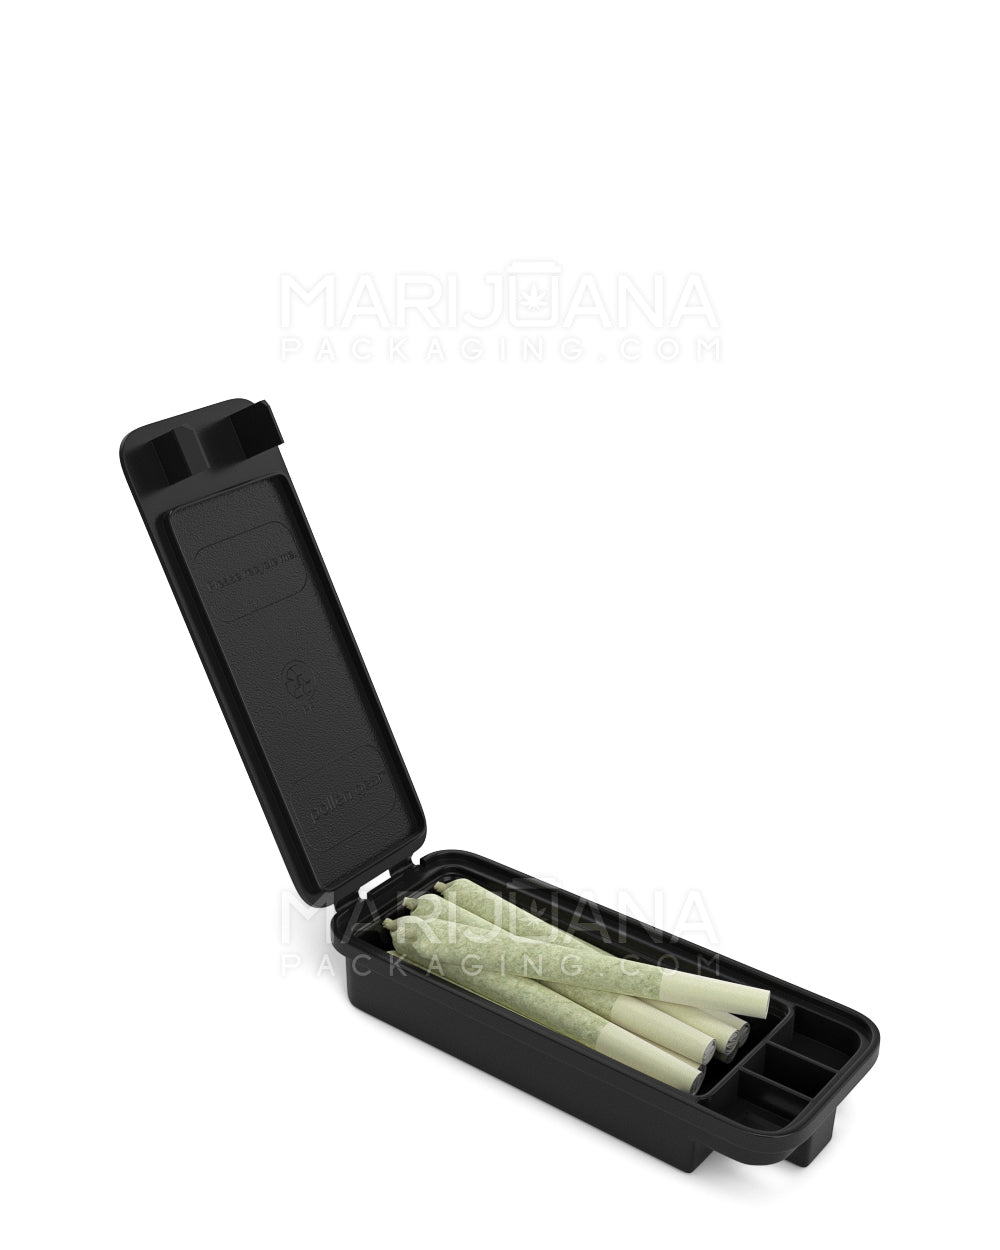 ONEONTA Joint Holder - Waterproof Joint Case - Joint Holder Case for  Travel, Hard, Pocket Size, Holds rolls up to 135mm Long